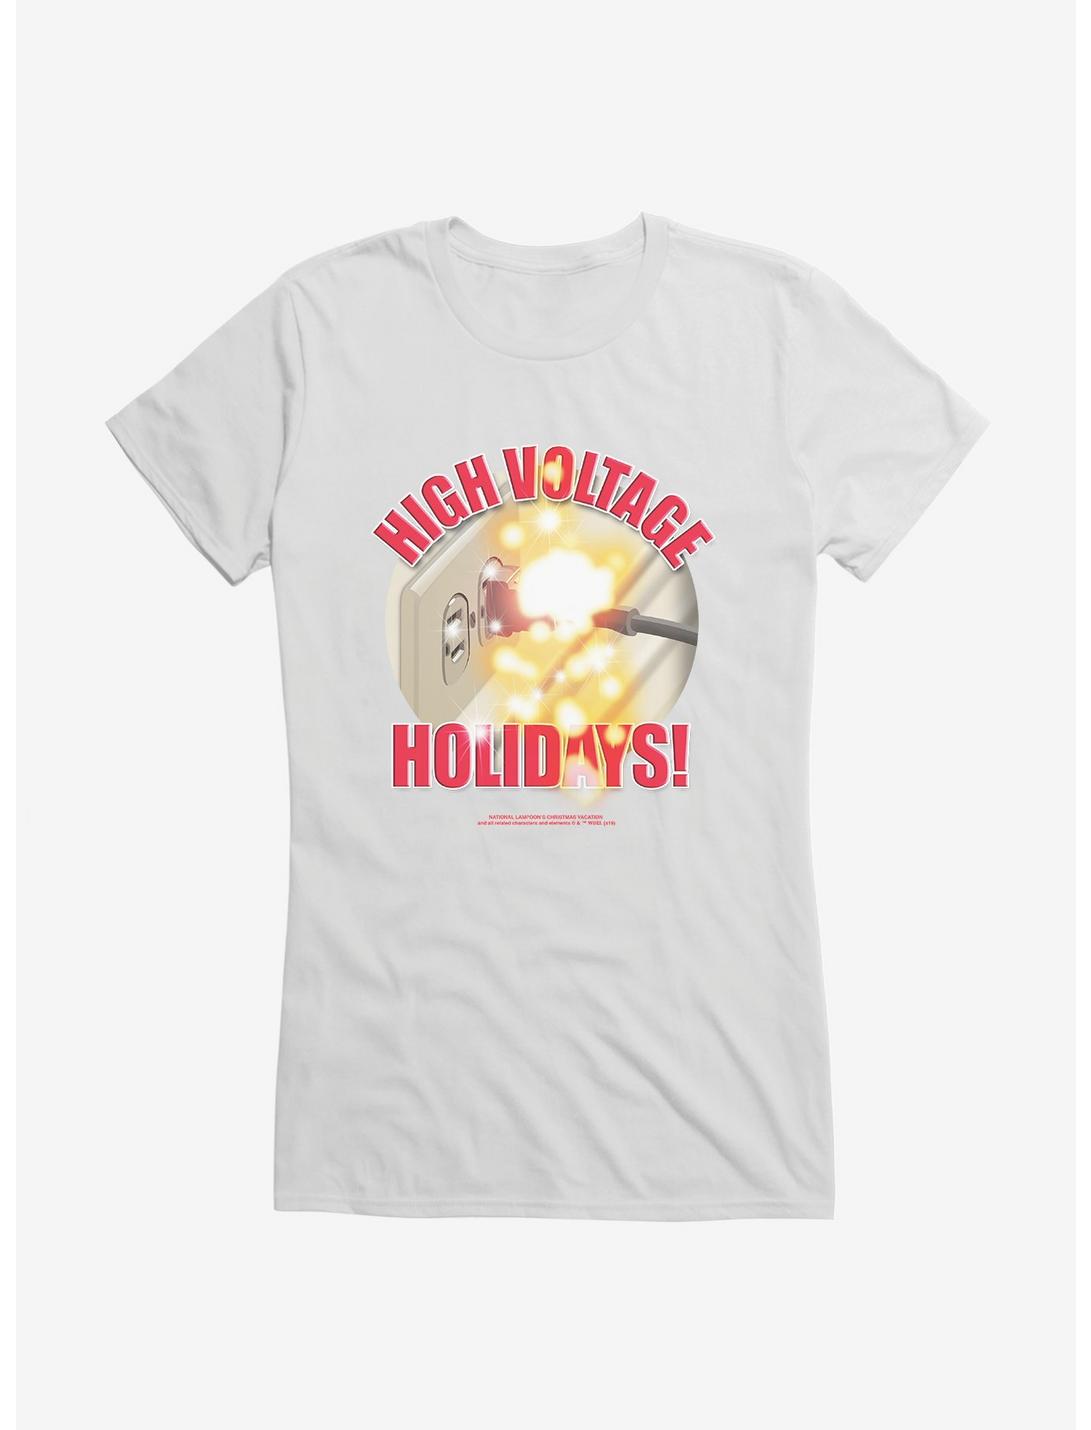 National Lampoon's Christmas Vacation High Voltage Girl's T-Shirt, , hi-res